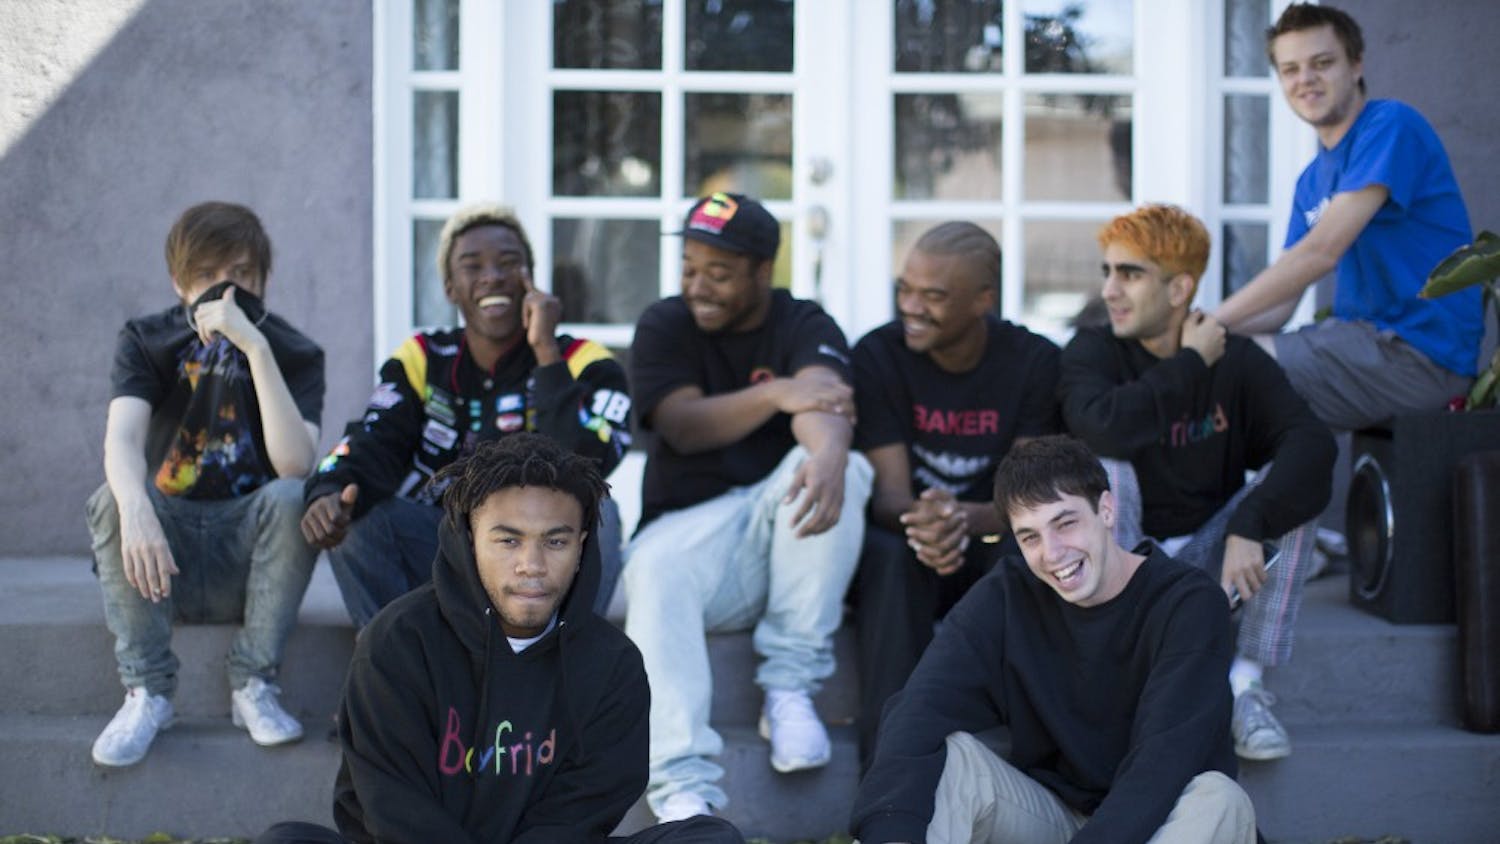 Hip-hop collective Brockhampton has ousted member Ameer Vann over allegations of sexual misconduct, according to a statement the group released on Twitter. From front left, Kevin Abstract and Matt Champion; from rear left, bearface, Merlyn Wood, Dom McLennon, Ameer Vann, Romil Hemnani, JOBA. (Myung J. Chun/Los Angeles Times/TNS)